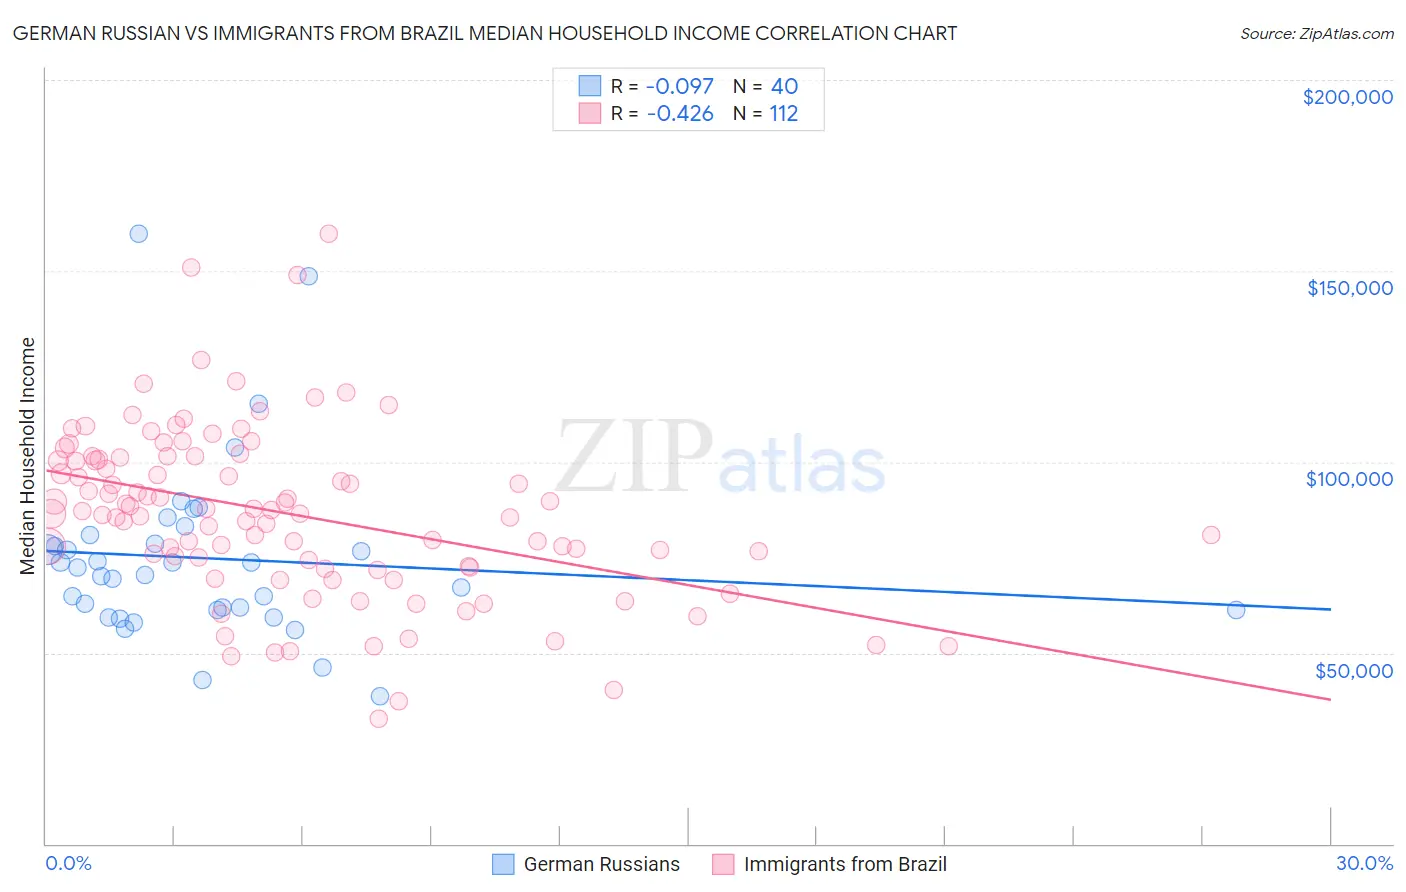 German Russian vs Immigrants from Brazil Median Household Income